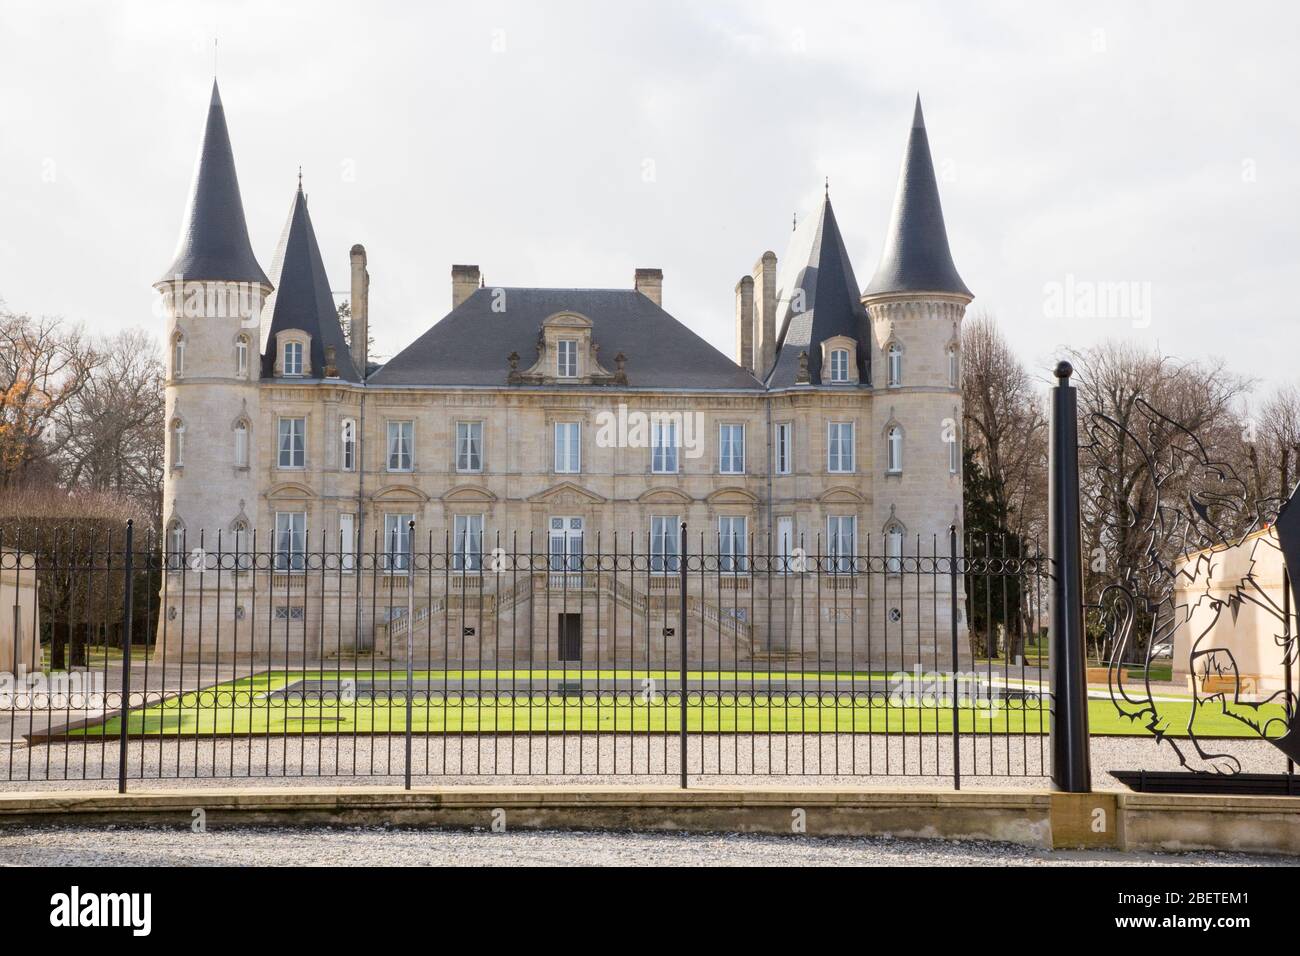 Pauillac, Bordeaux France - December 12 2018 -  historic Chateau Pichon Longueville Baron situated in wine route of Pauillac in Bordeaux region of Fra Stock Photo